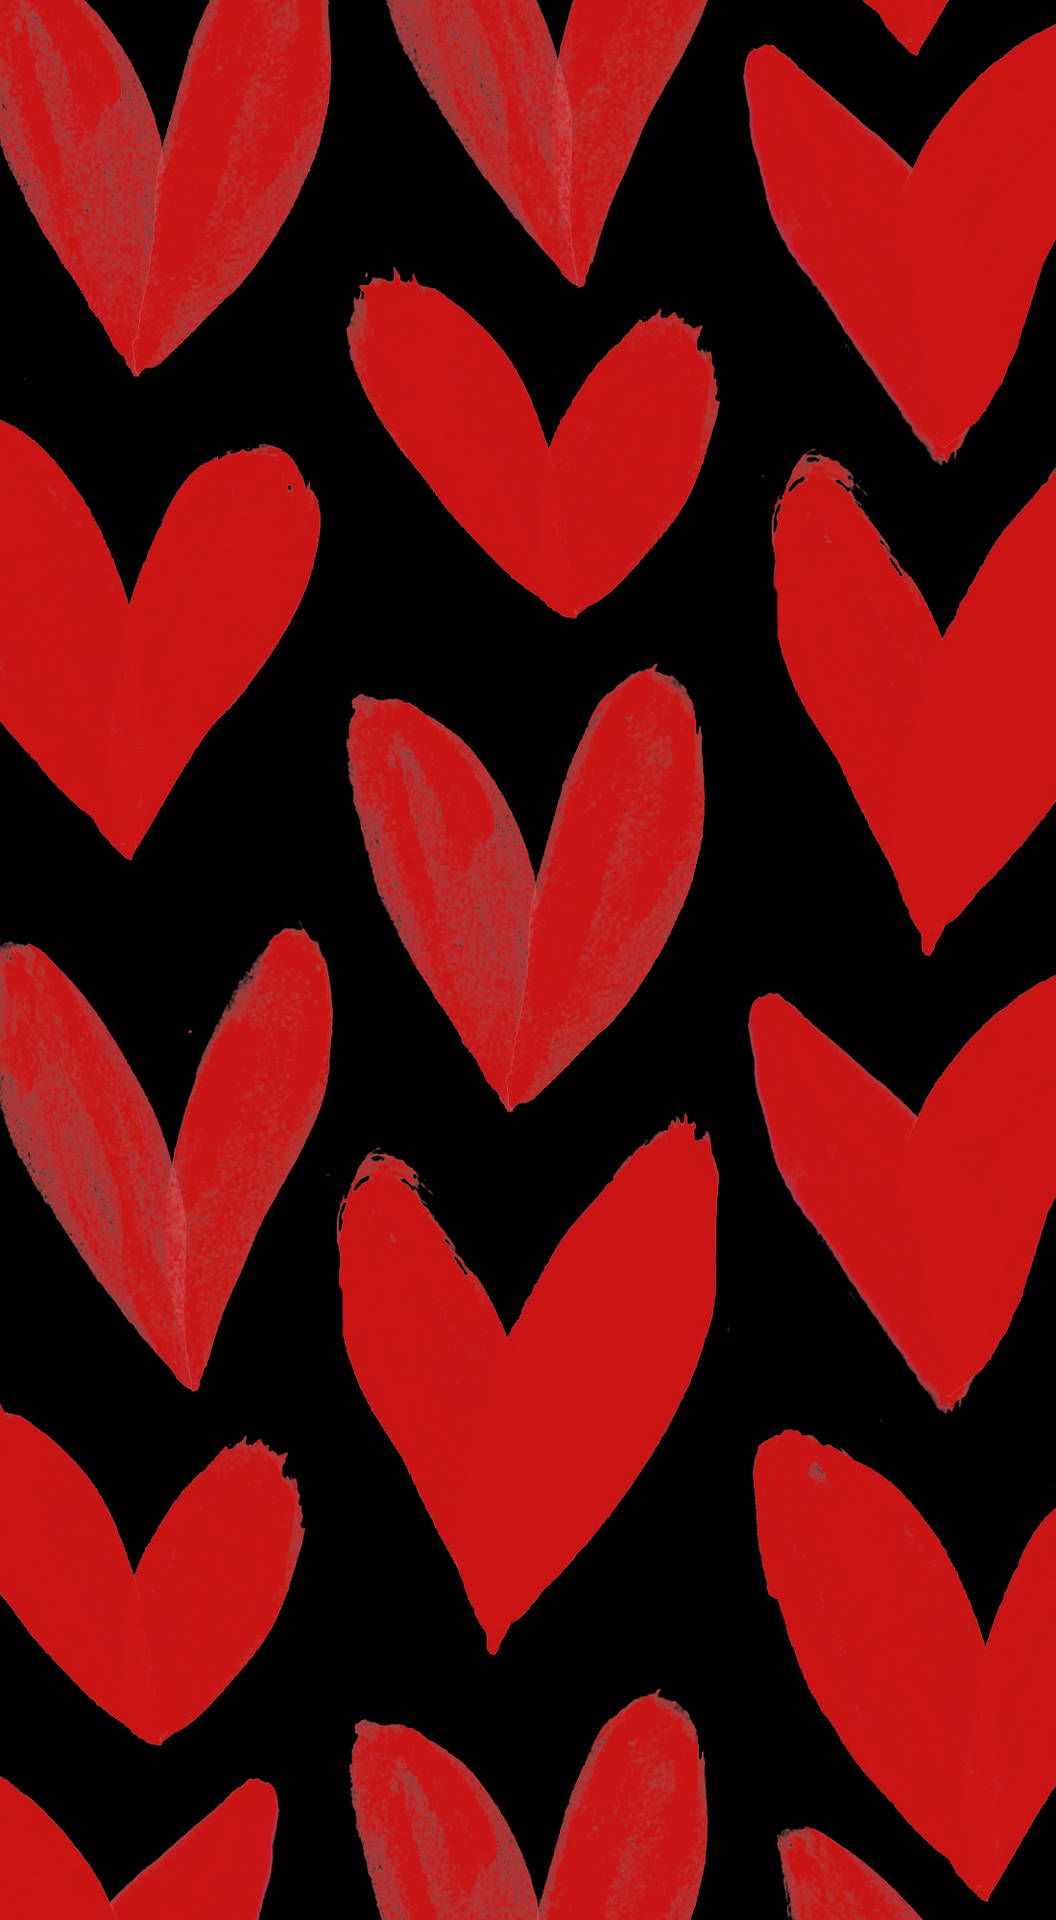 Red hearts on a black background - Heart